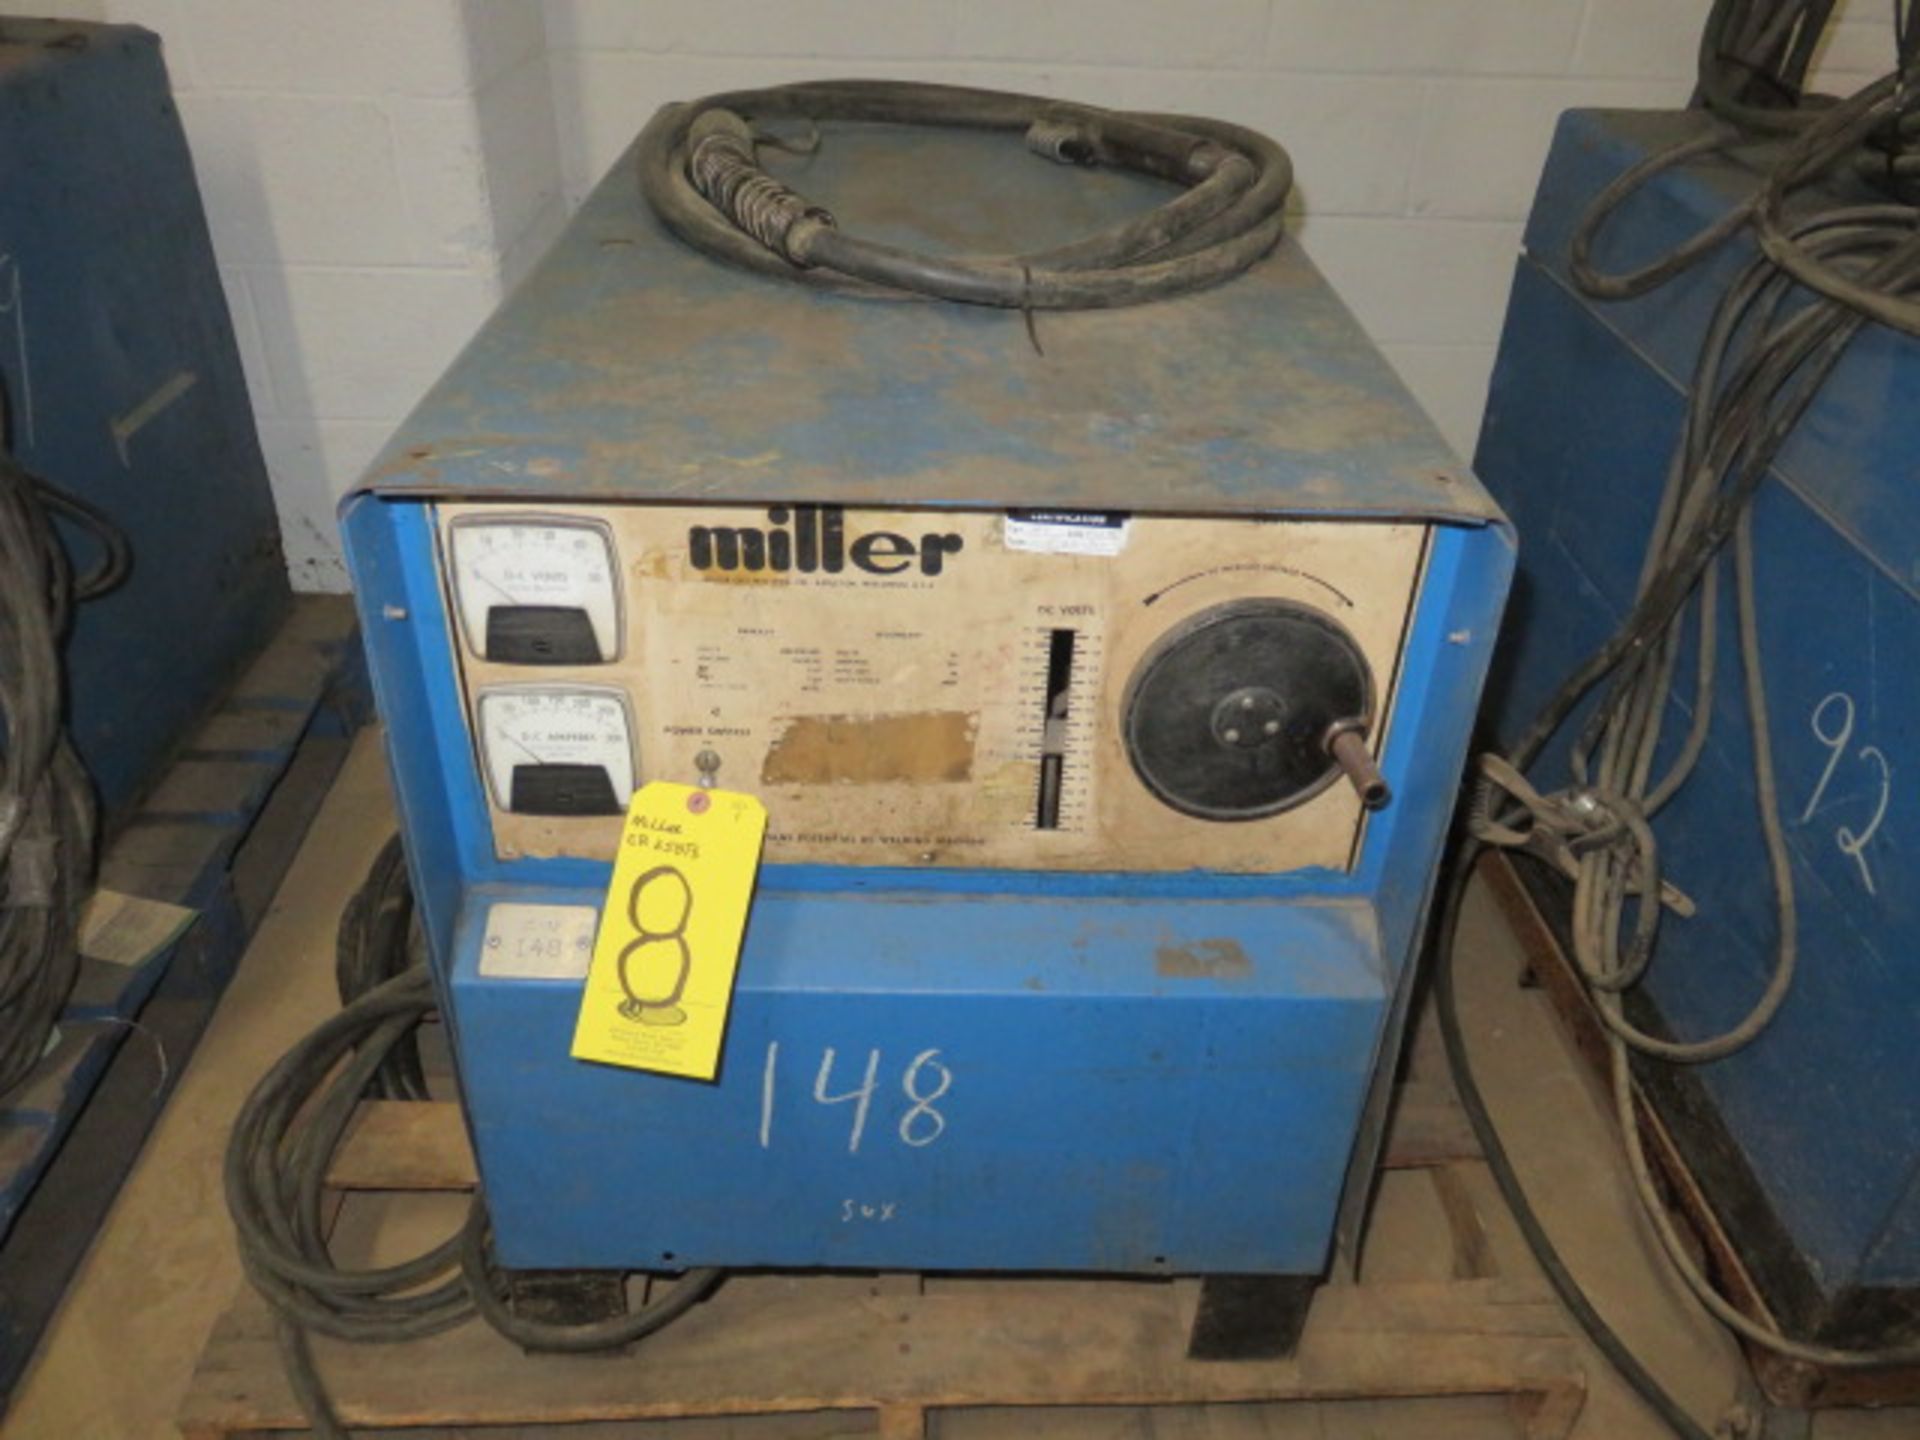 MILLER CP-250TS POWER SUPPLY (TAKEN OUT OF ACTIVE SERVICE-WORKING CONDITION IS UNKNOWN)